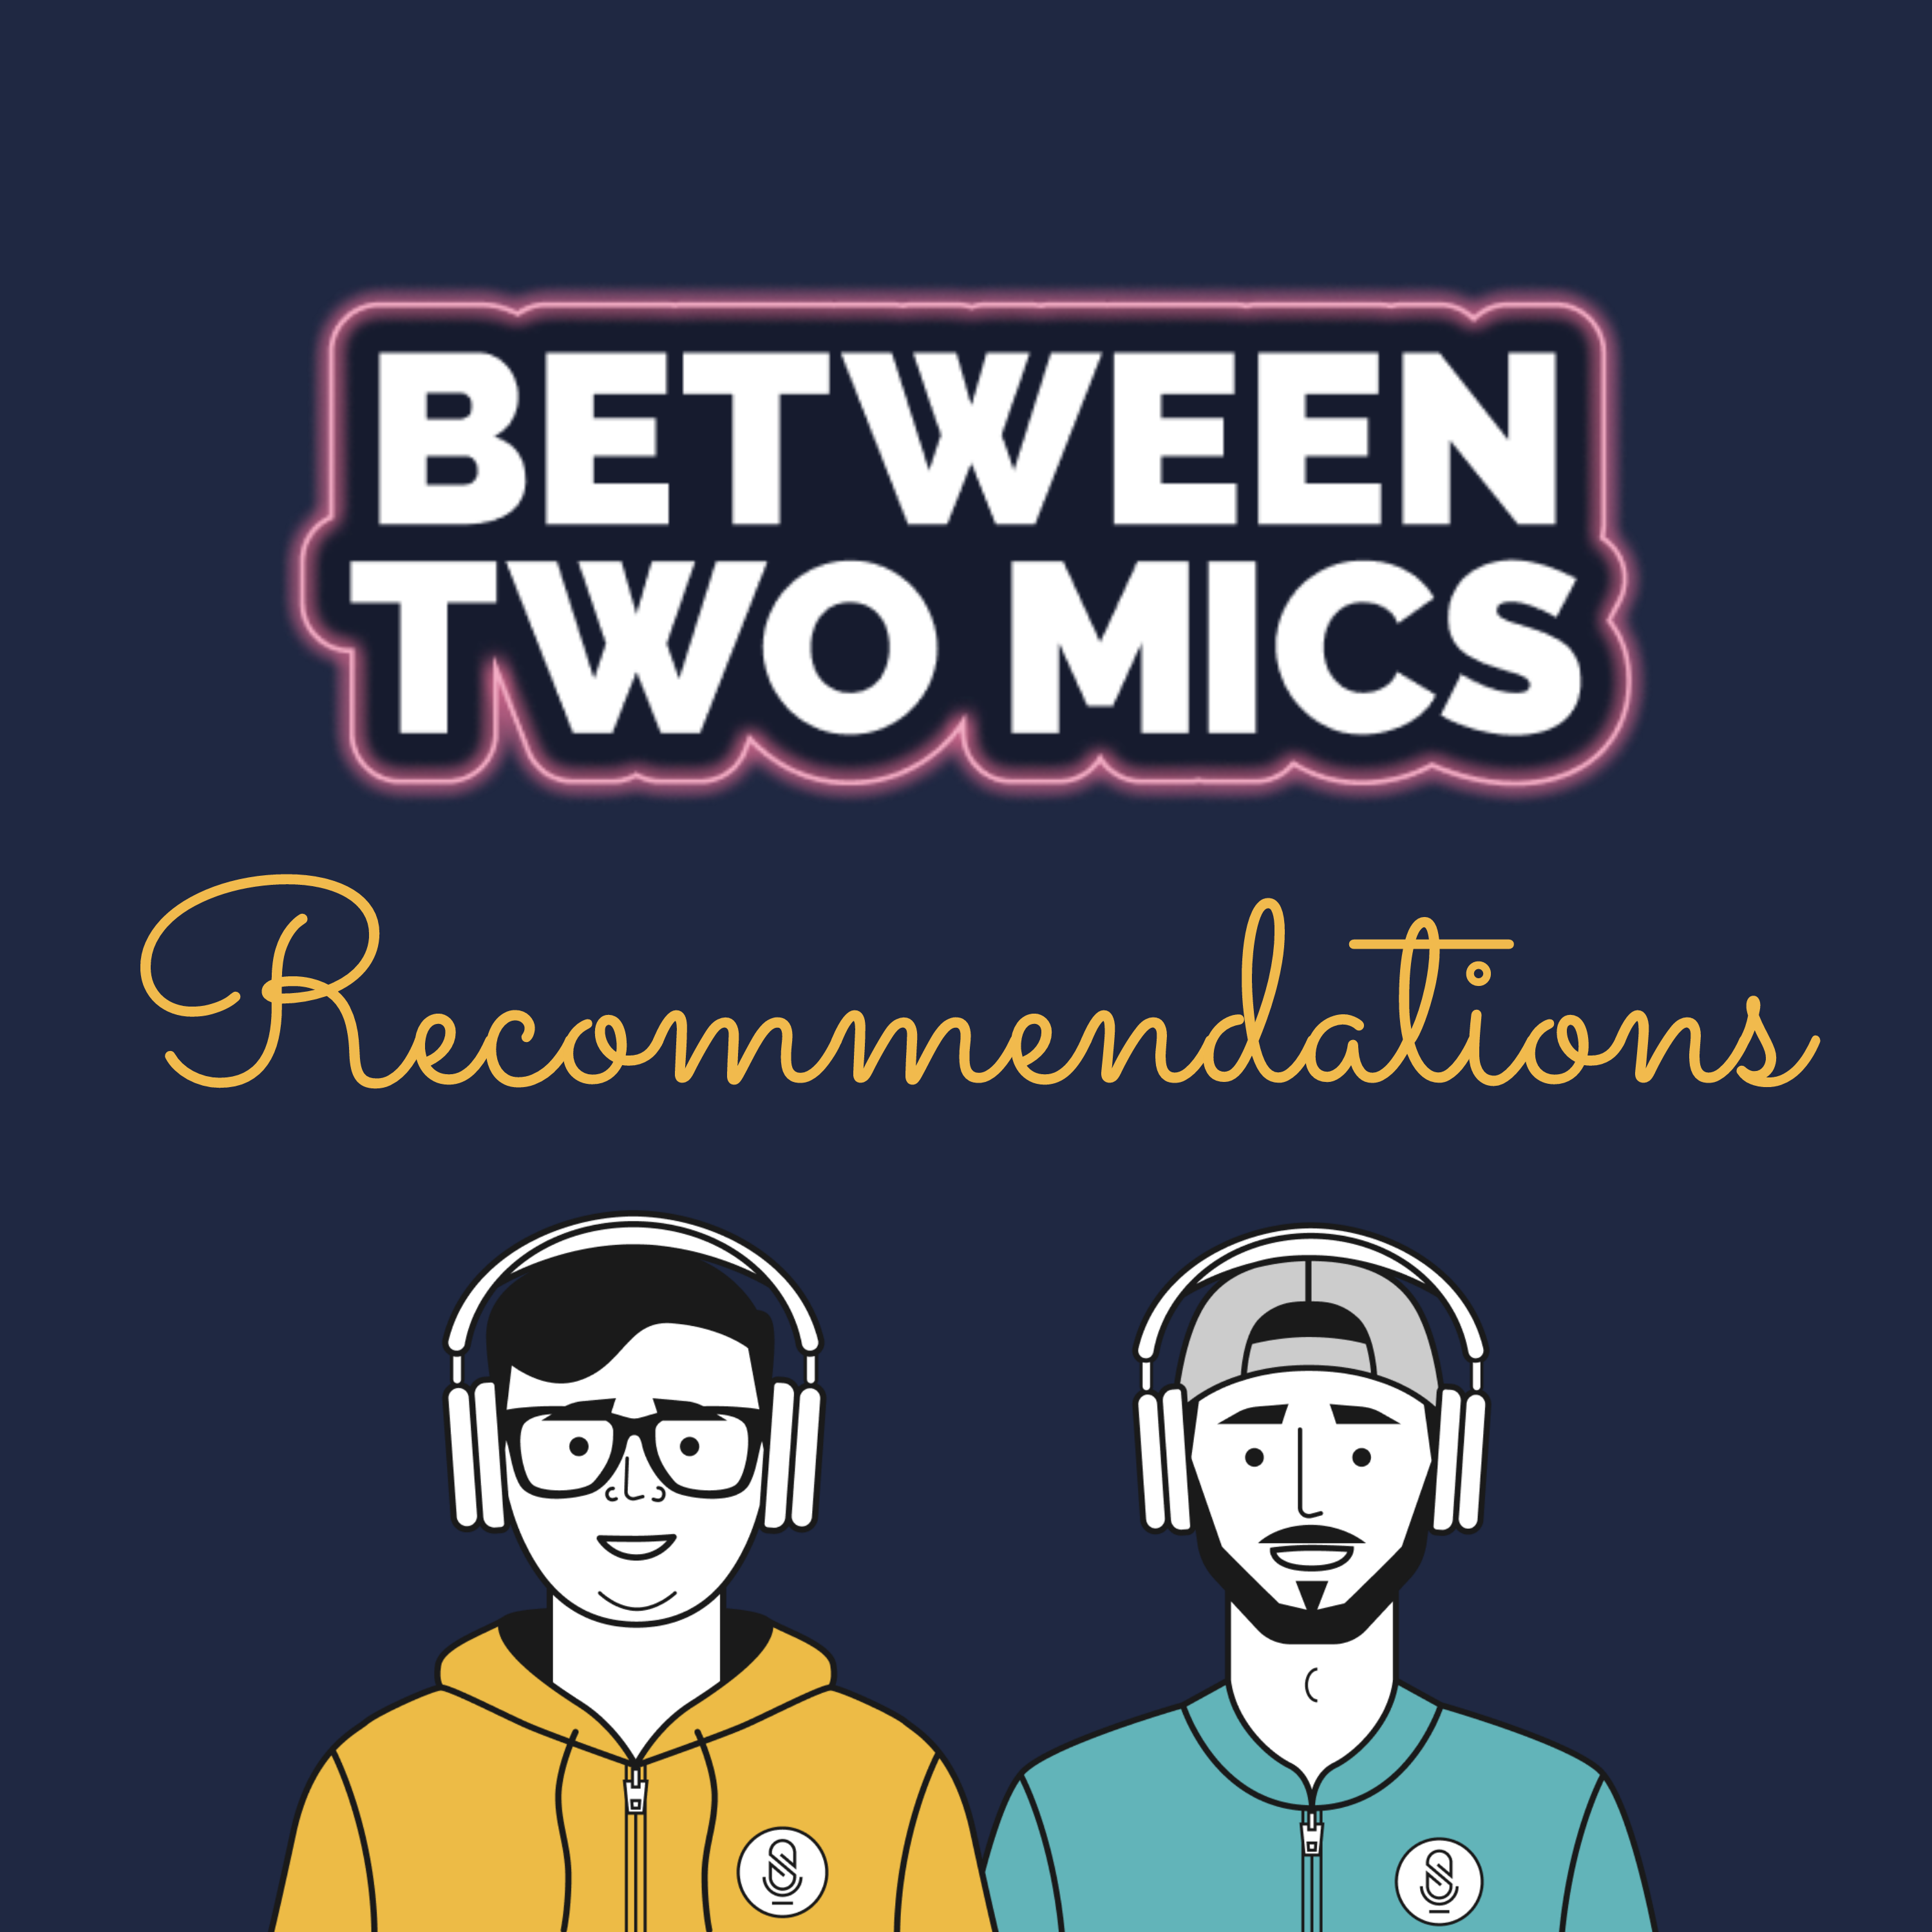 Between Two Mics - Podcast Recommendations